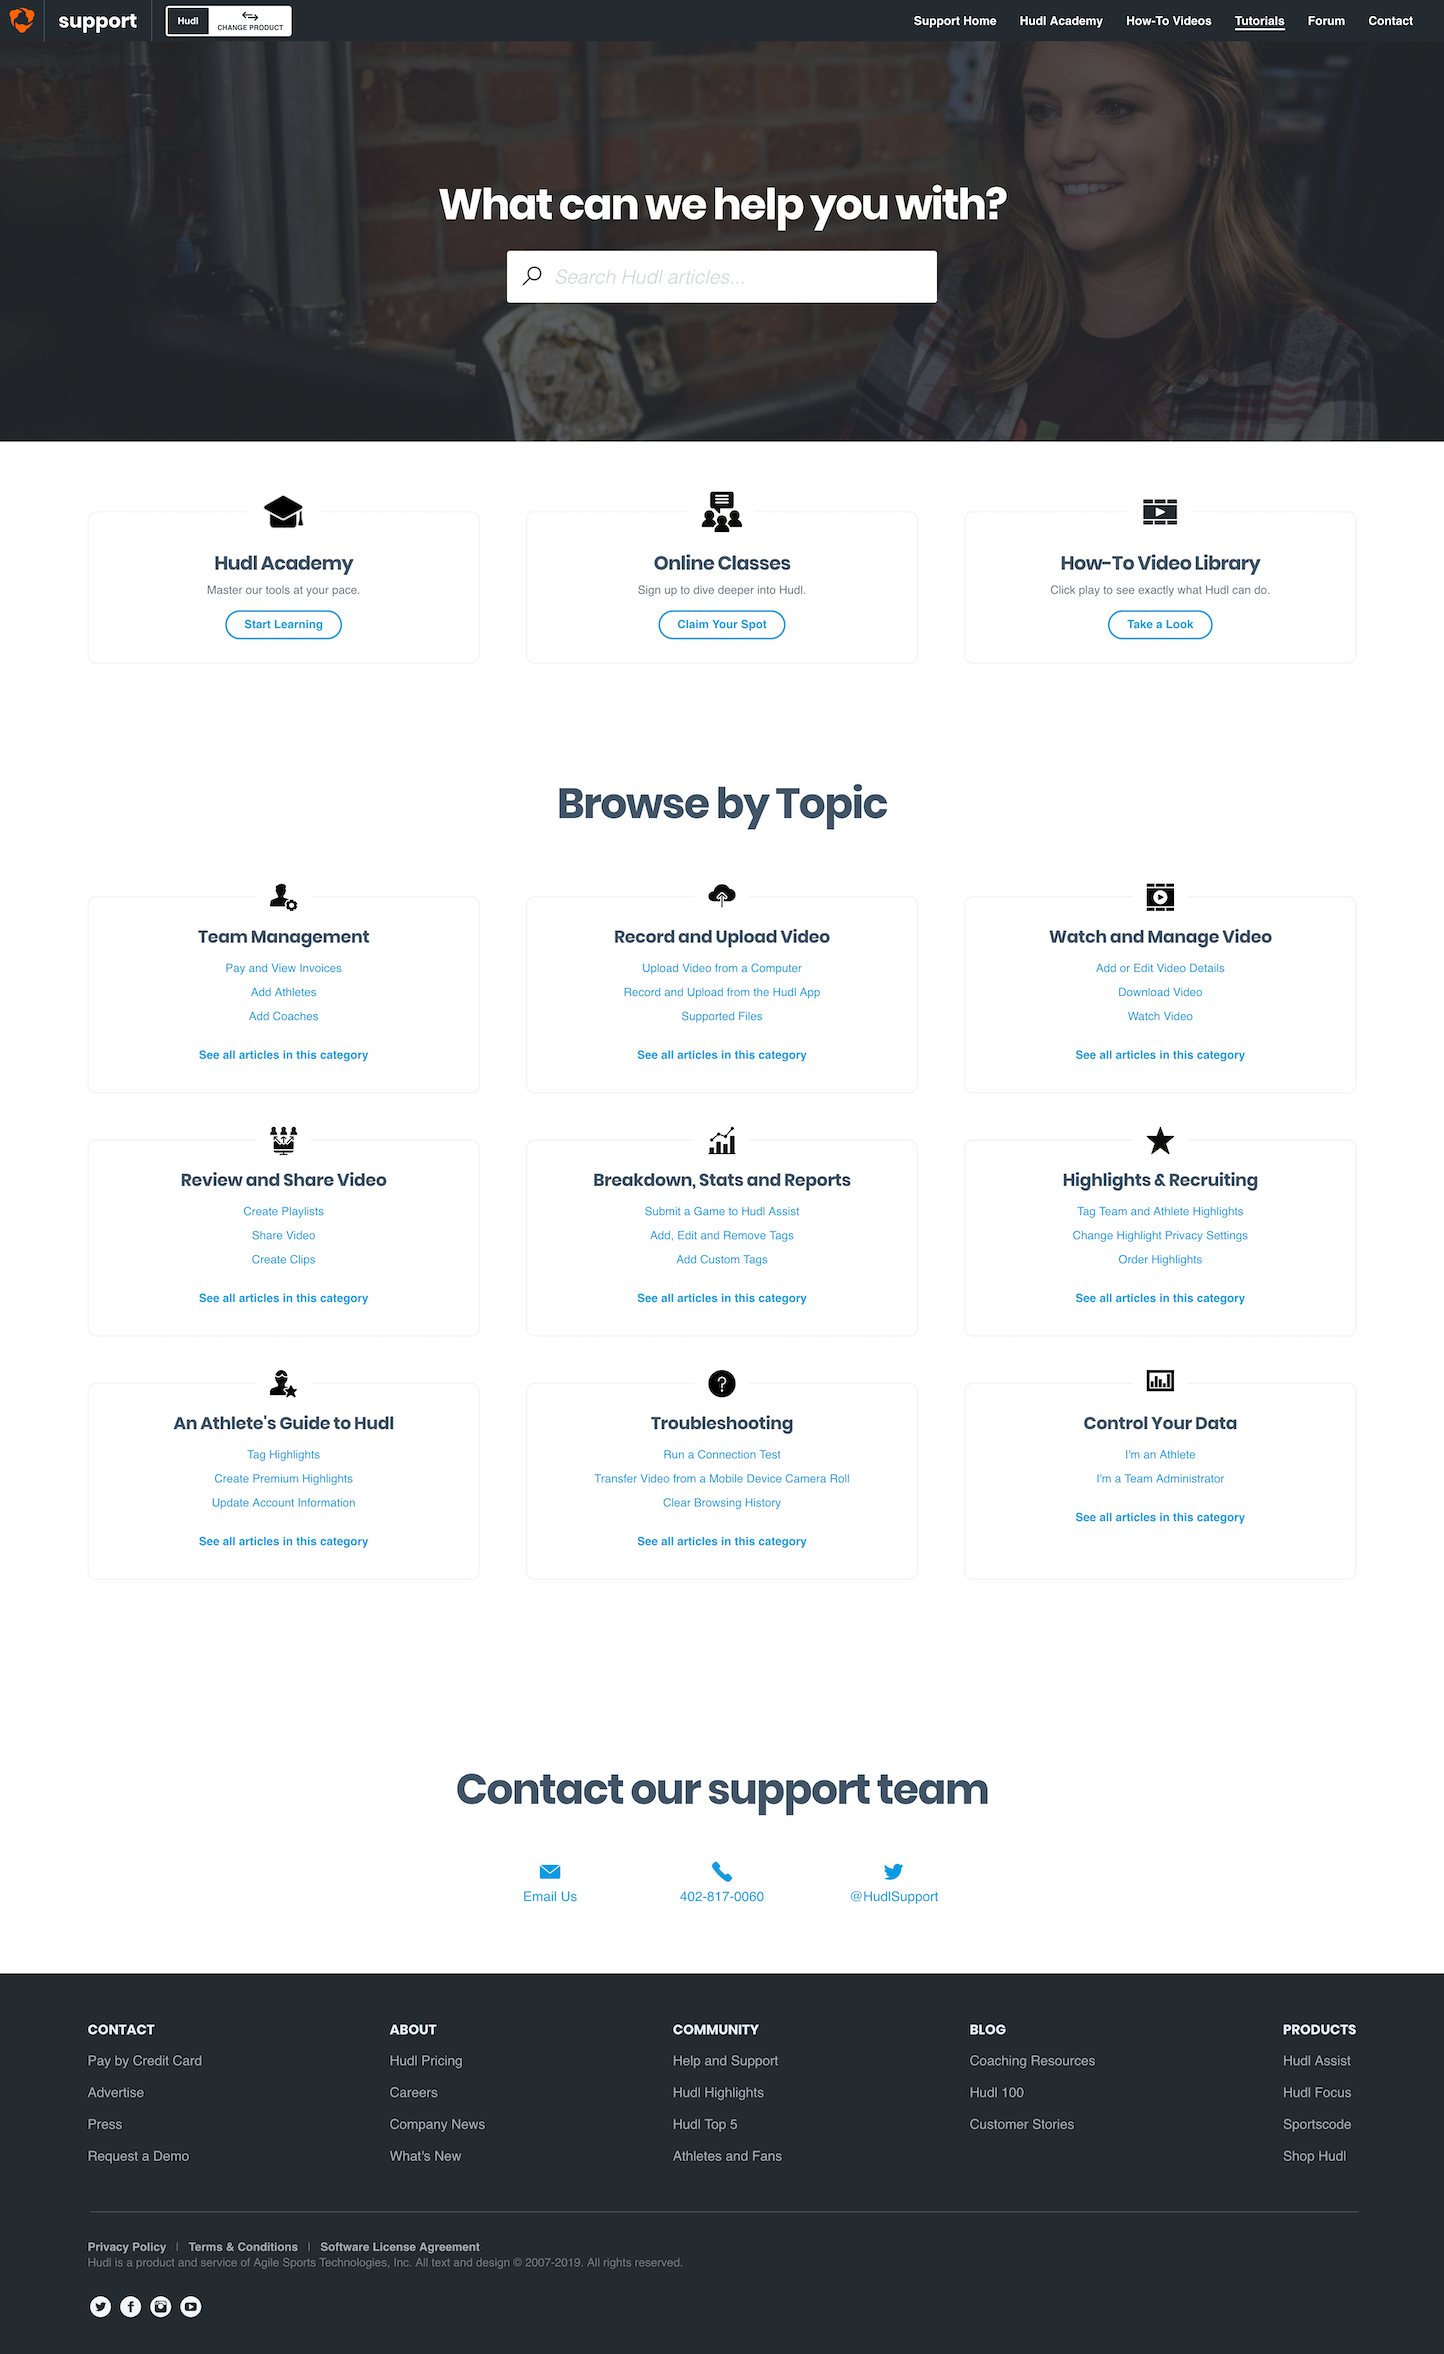 Screenshot of the Support page from the Hudl website.